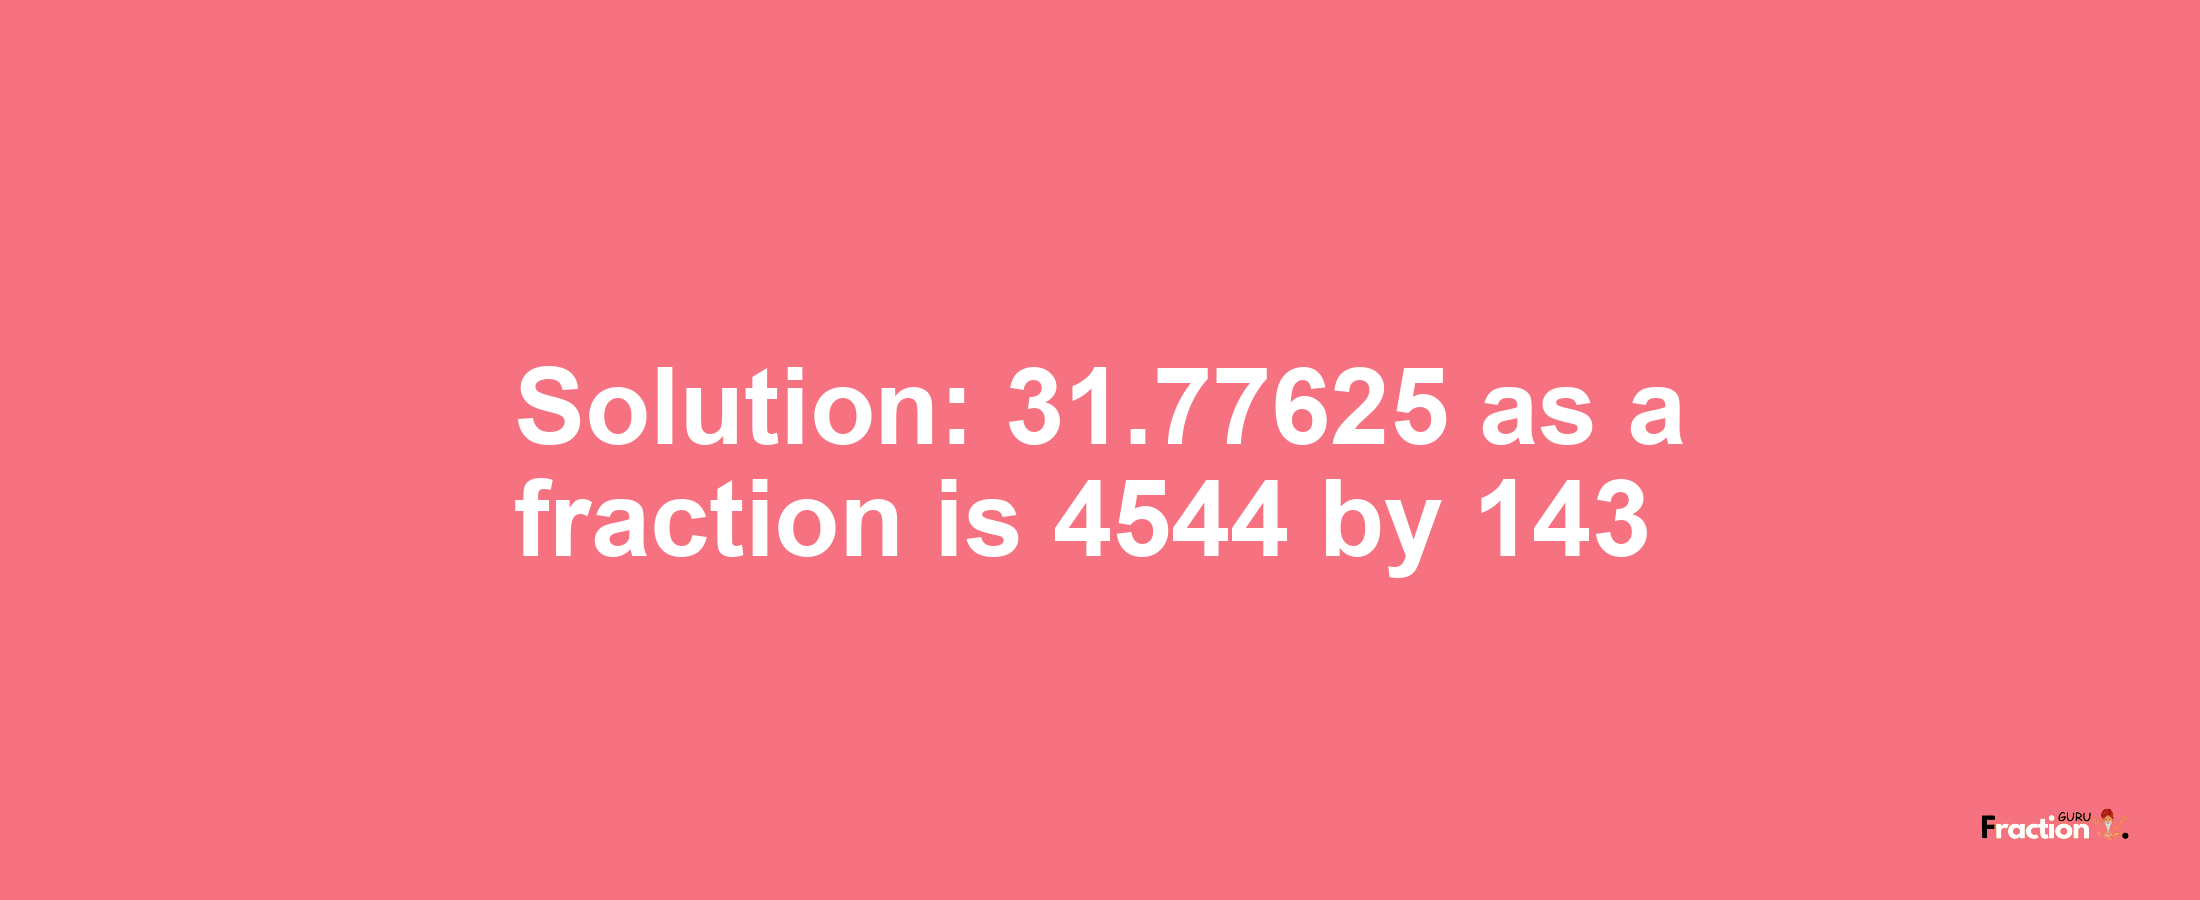 Solution:31.77625 as a fraction is 4544/143